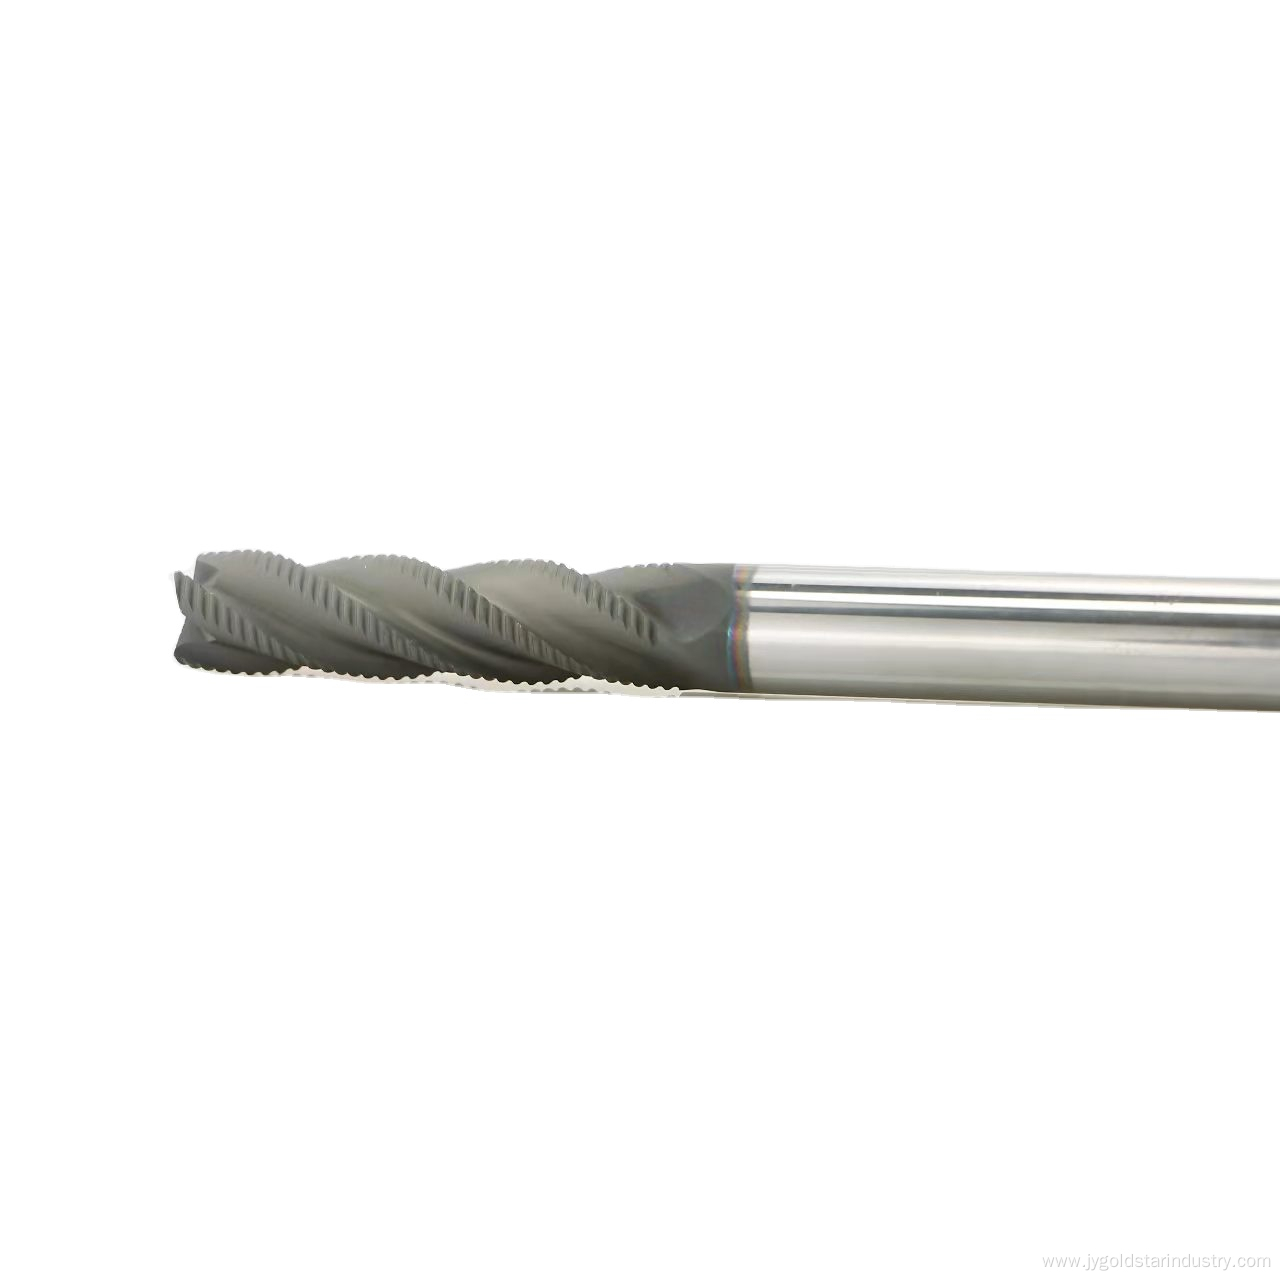 Carbide Diamond coated milling cutter for roughing